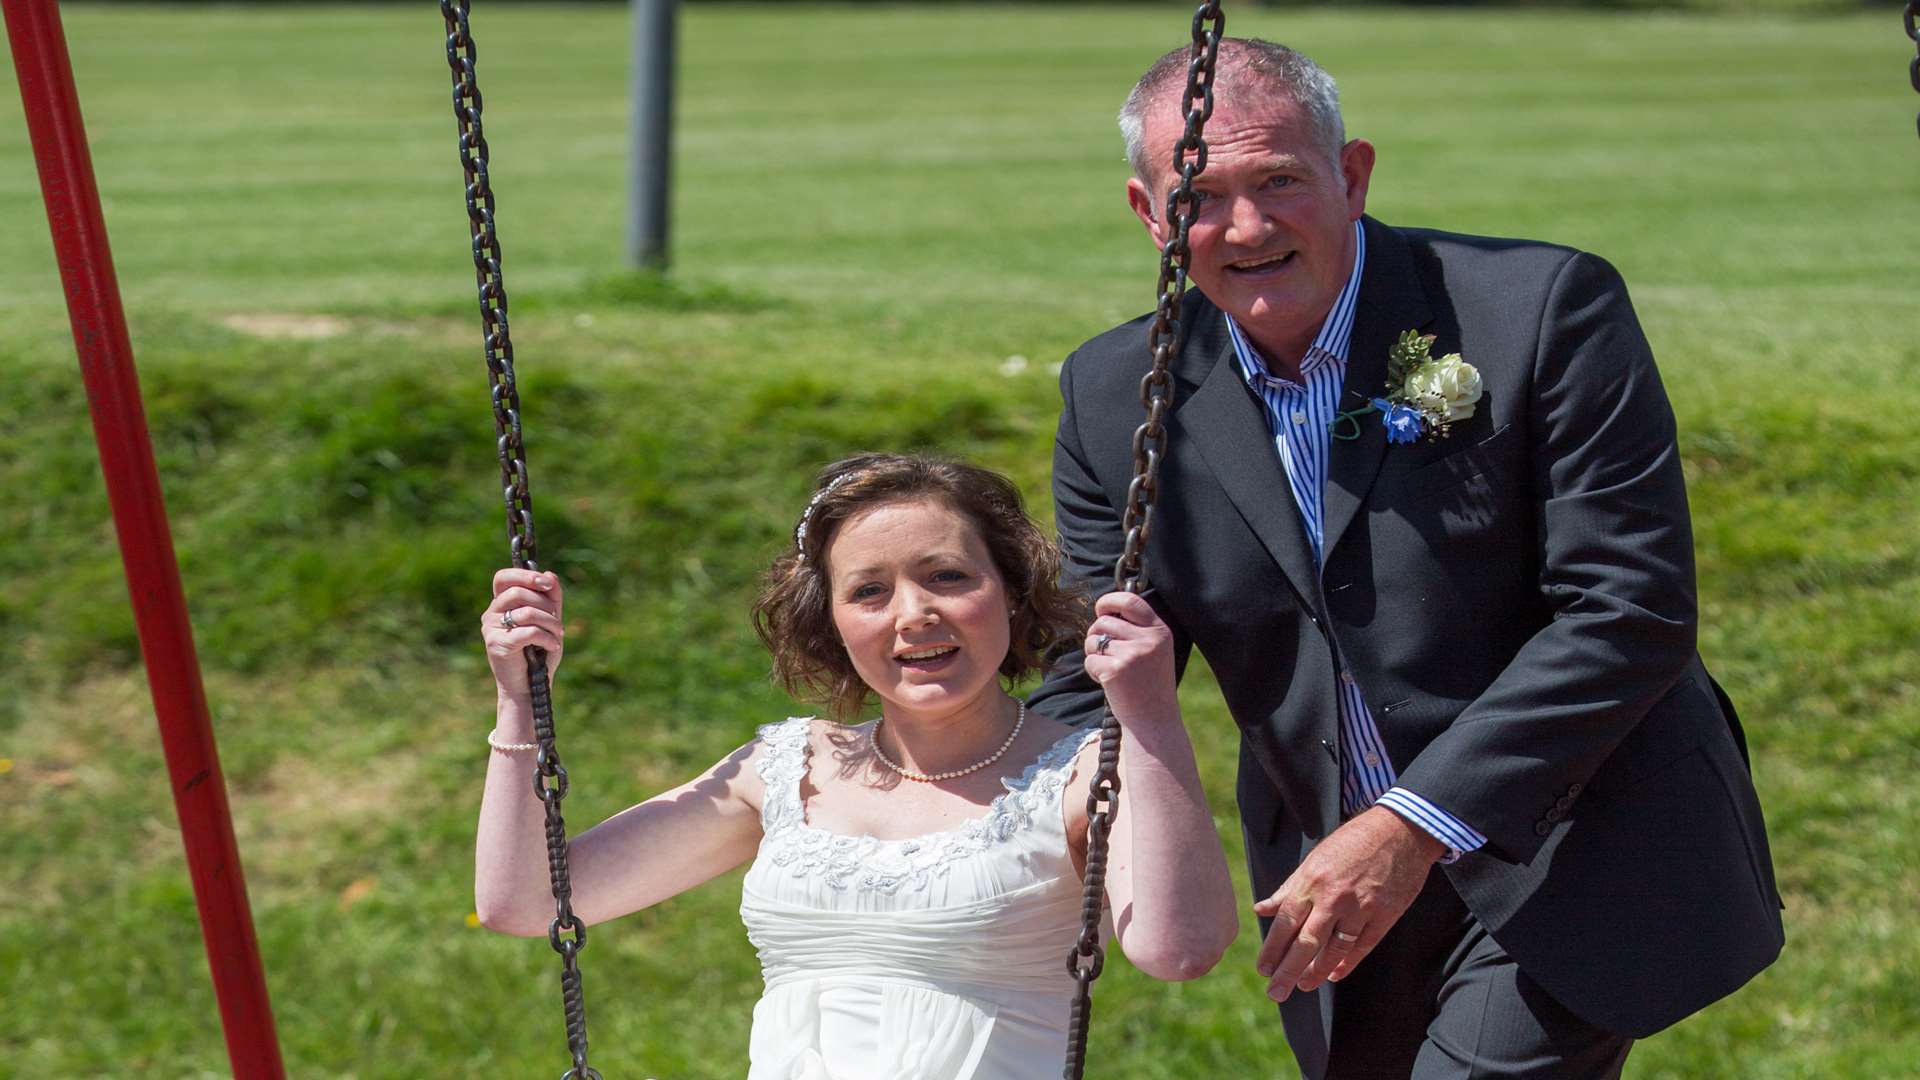 Graham and Tara Smith have fun at Tenterden recreation ground before their marriage blessing